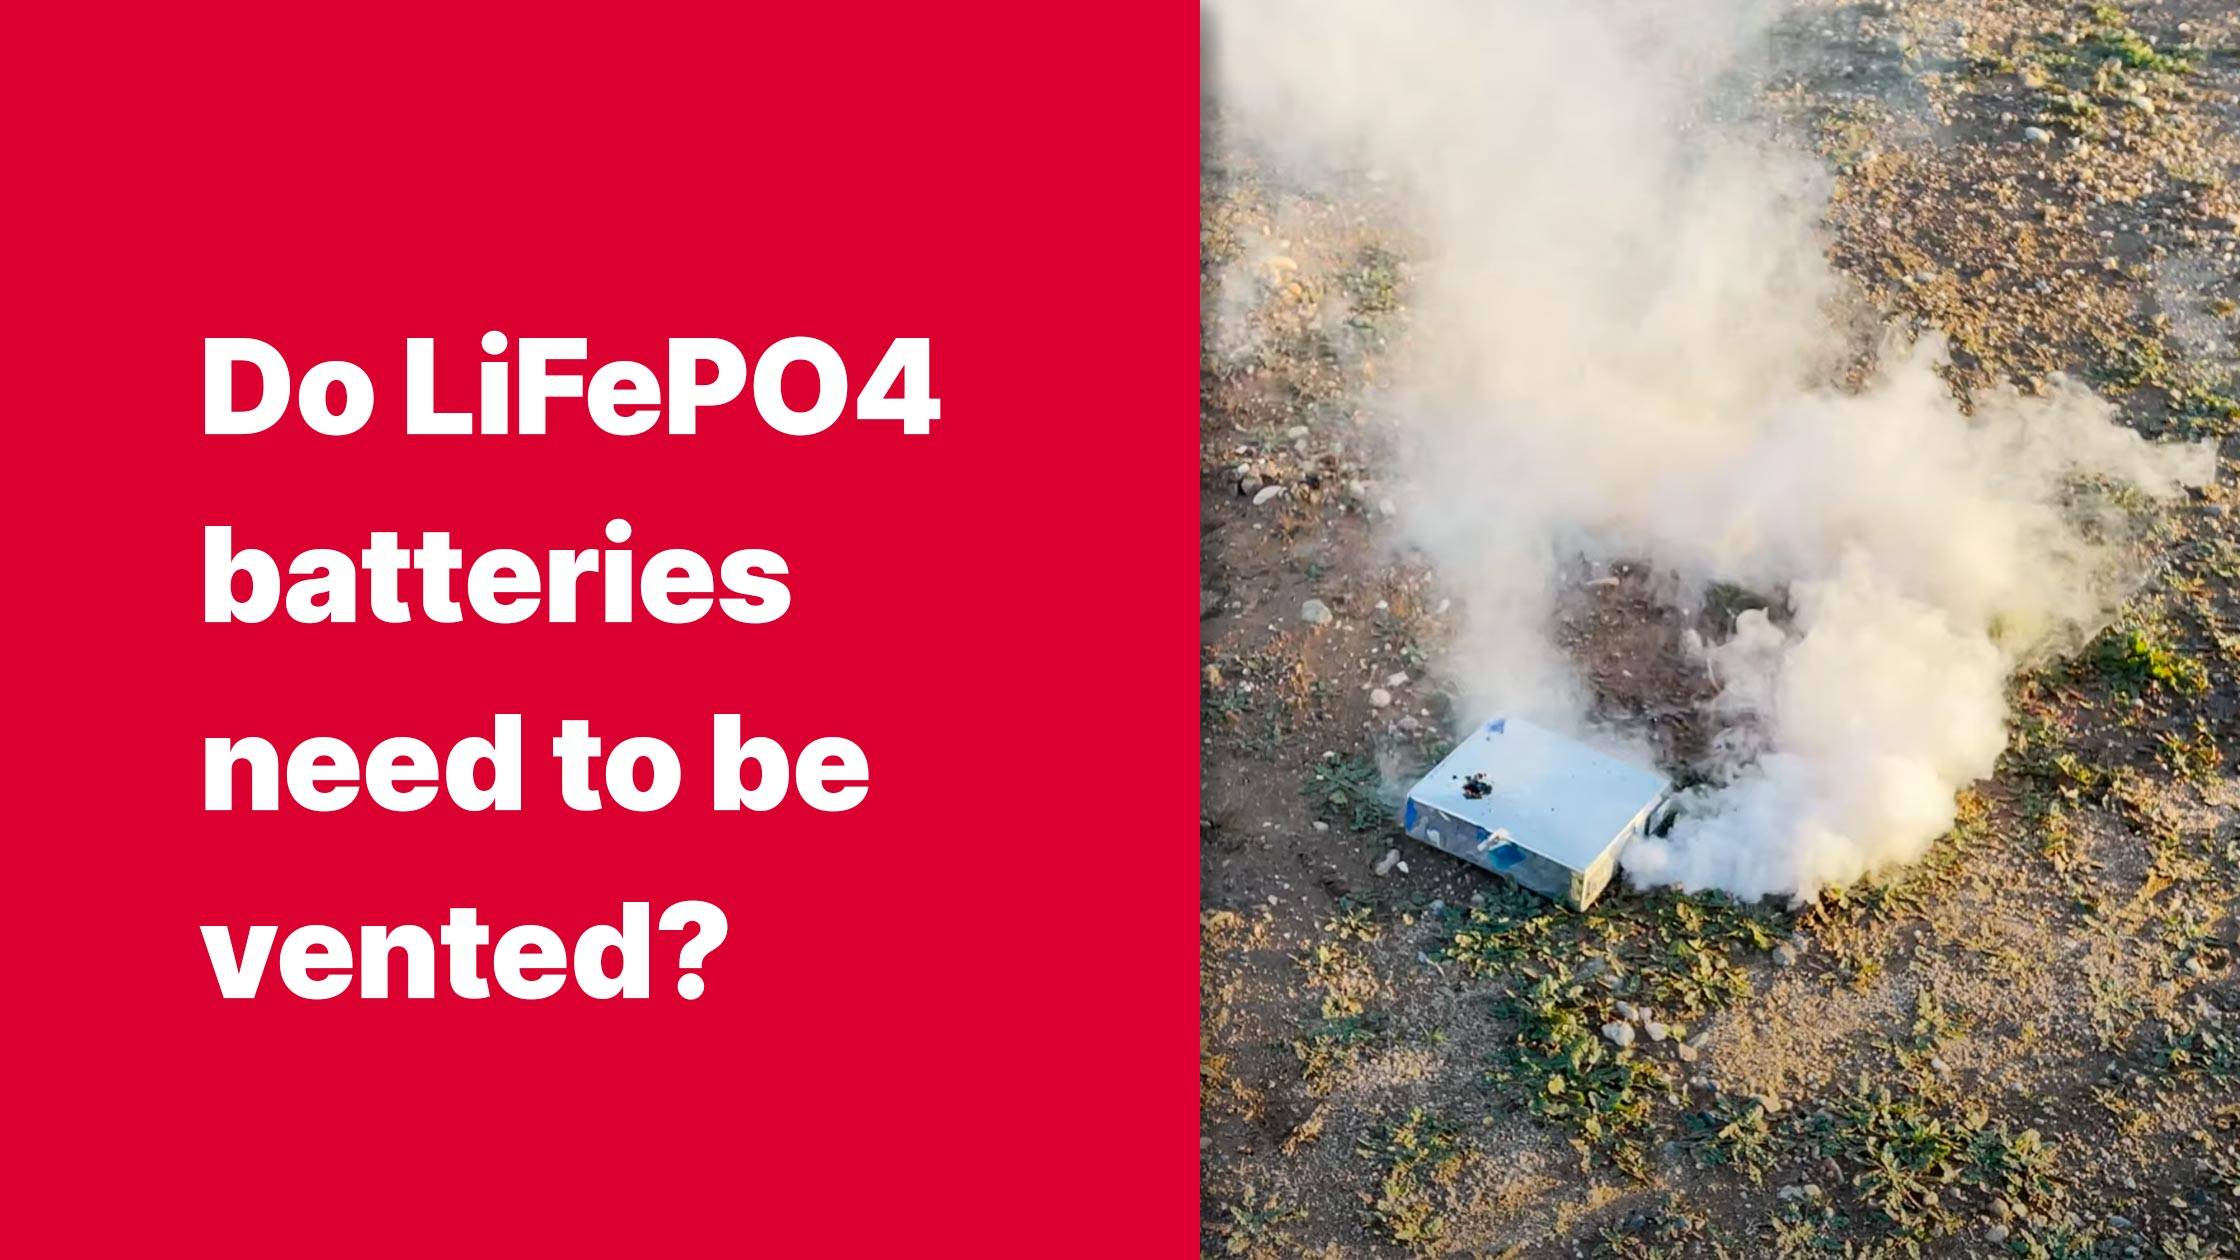 Do LiFePO4 batteries need to be vented? Can LiFePO4 batteries catch fire?